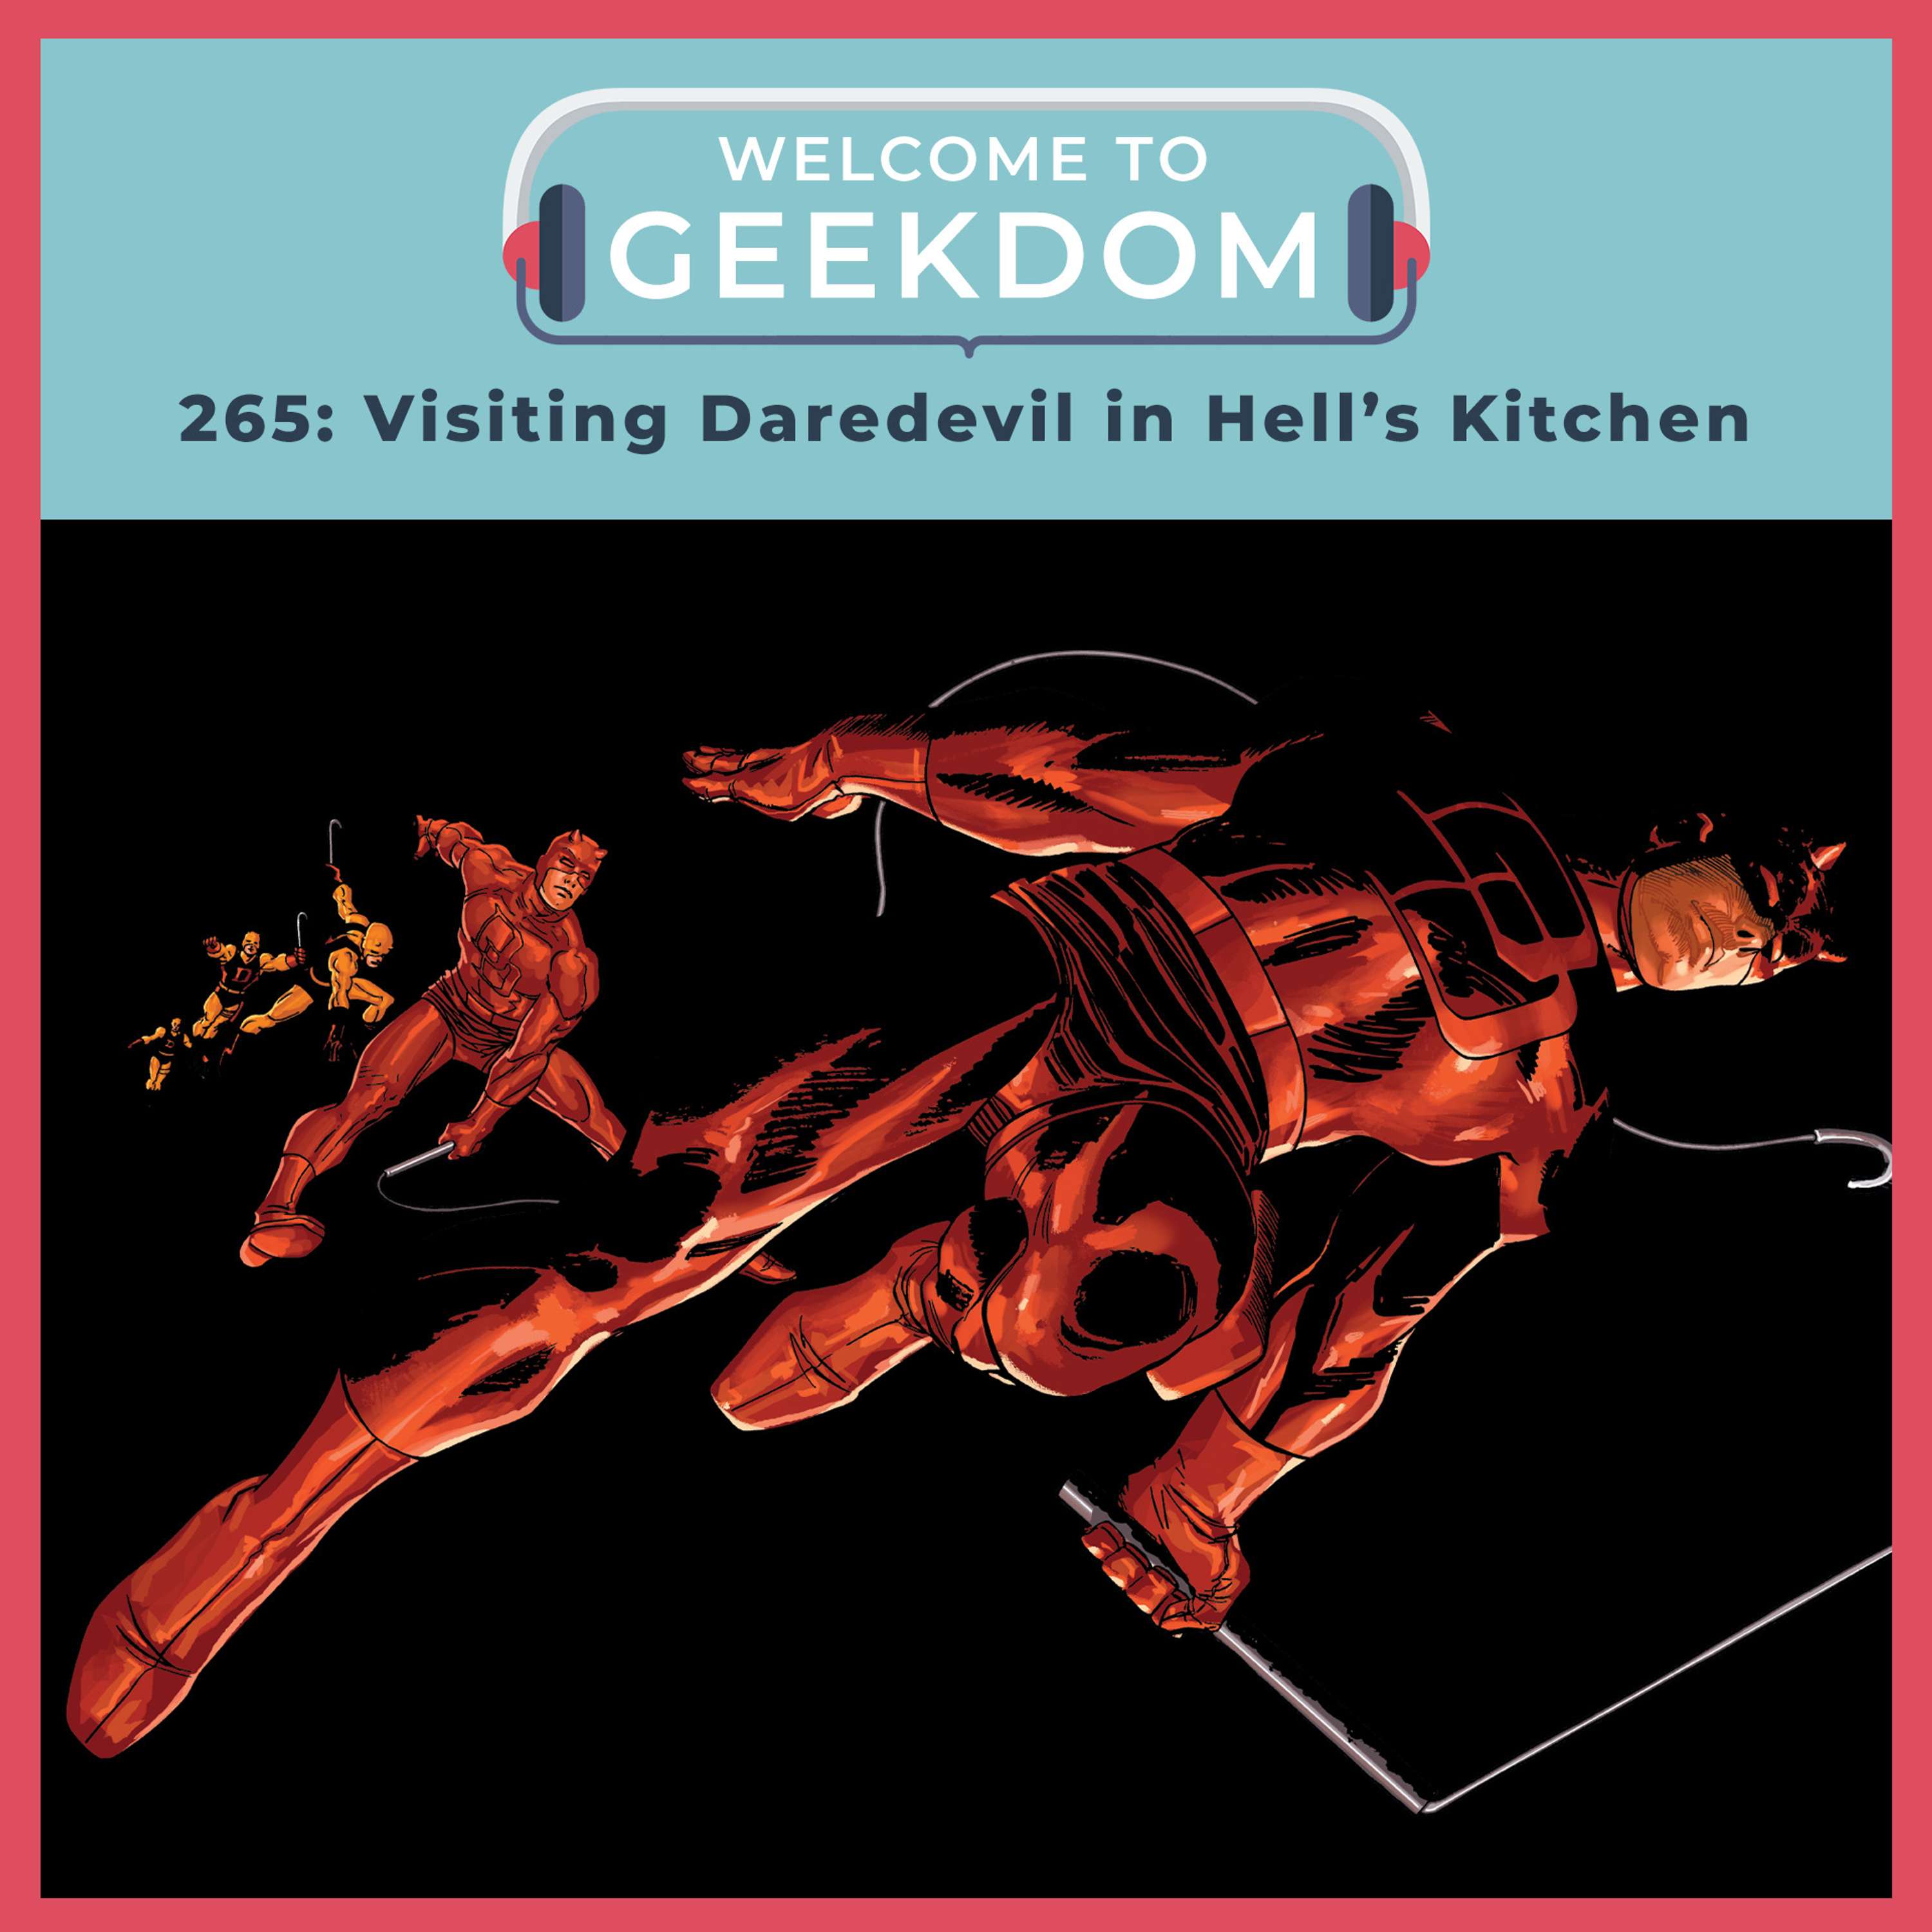 Visiting Daredevil in Hell’s Kitchen